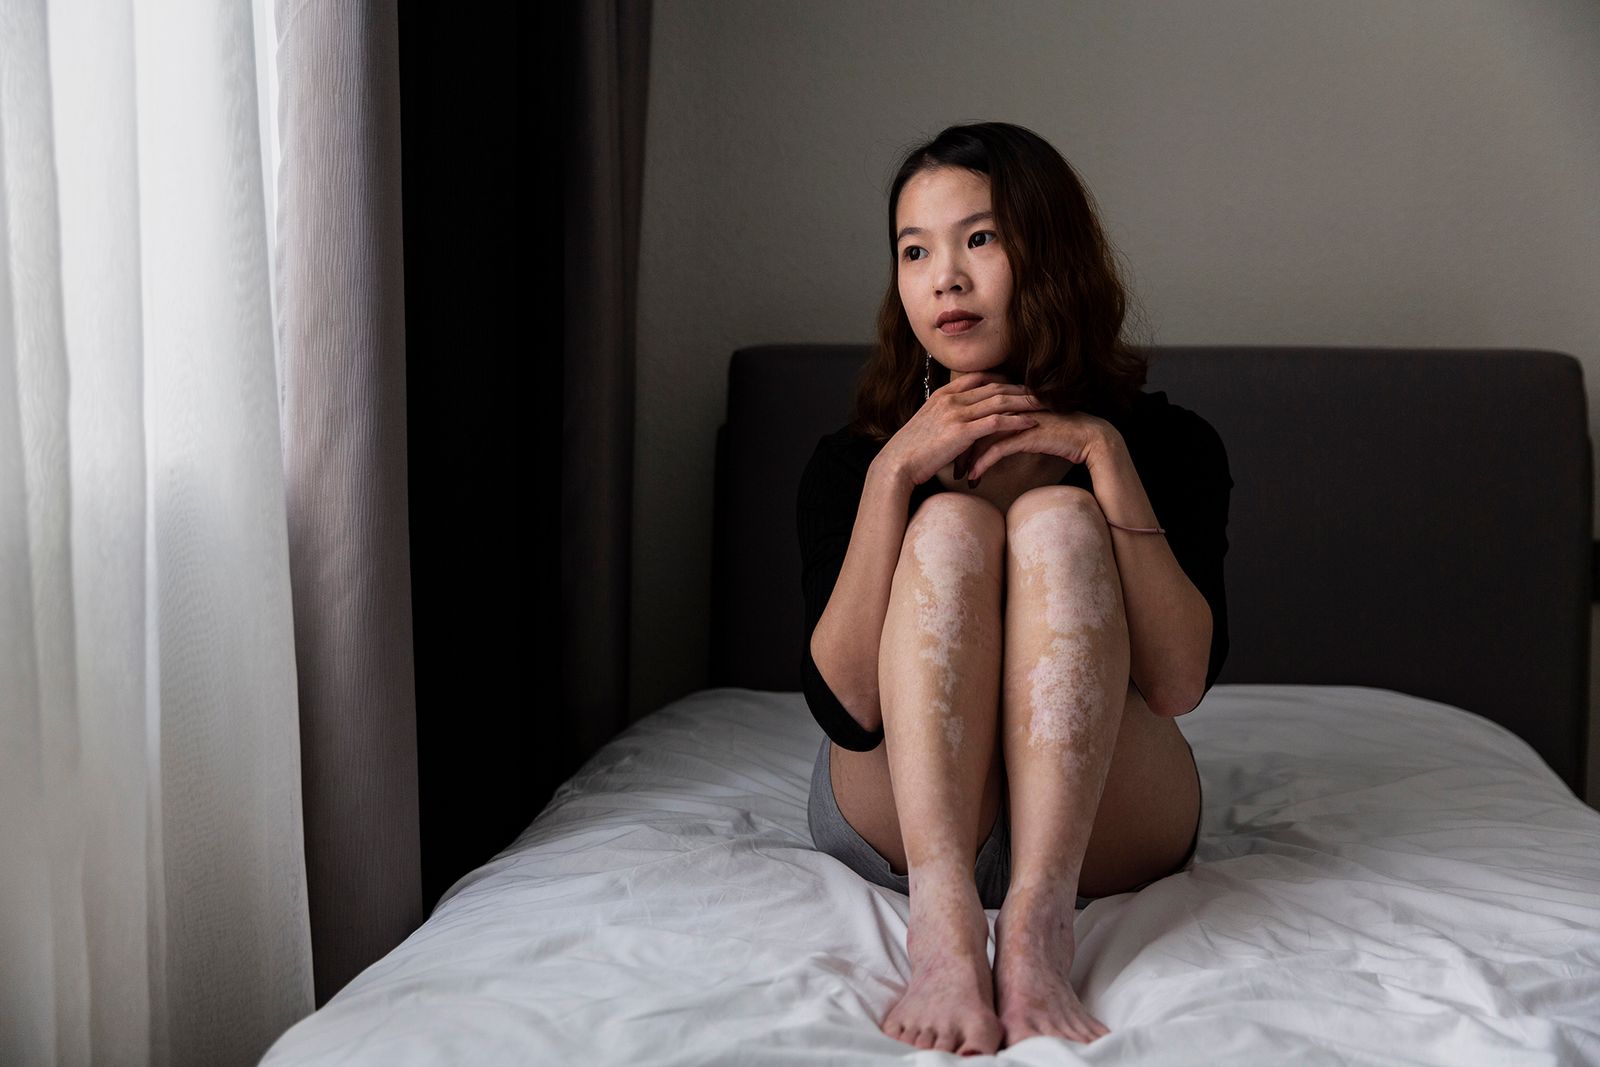 Woman with vitiligo holding pillow between legs on bed in front of white  wall at home